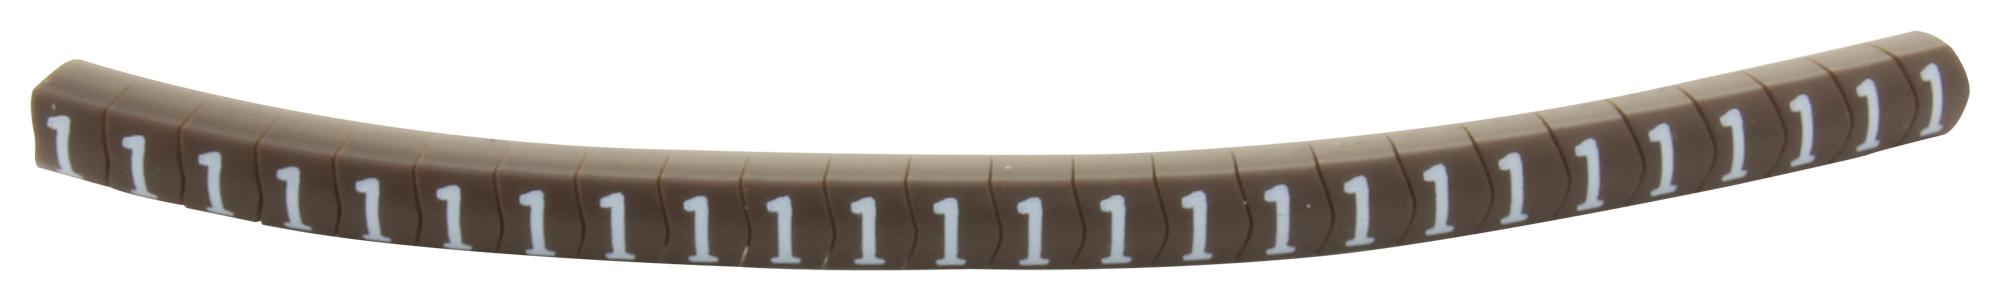 901-11001 CABLE MARKER, PRE PRINTED, PVC, BROWN HELLERMANNTYTON